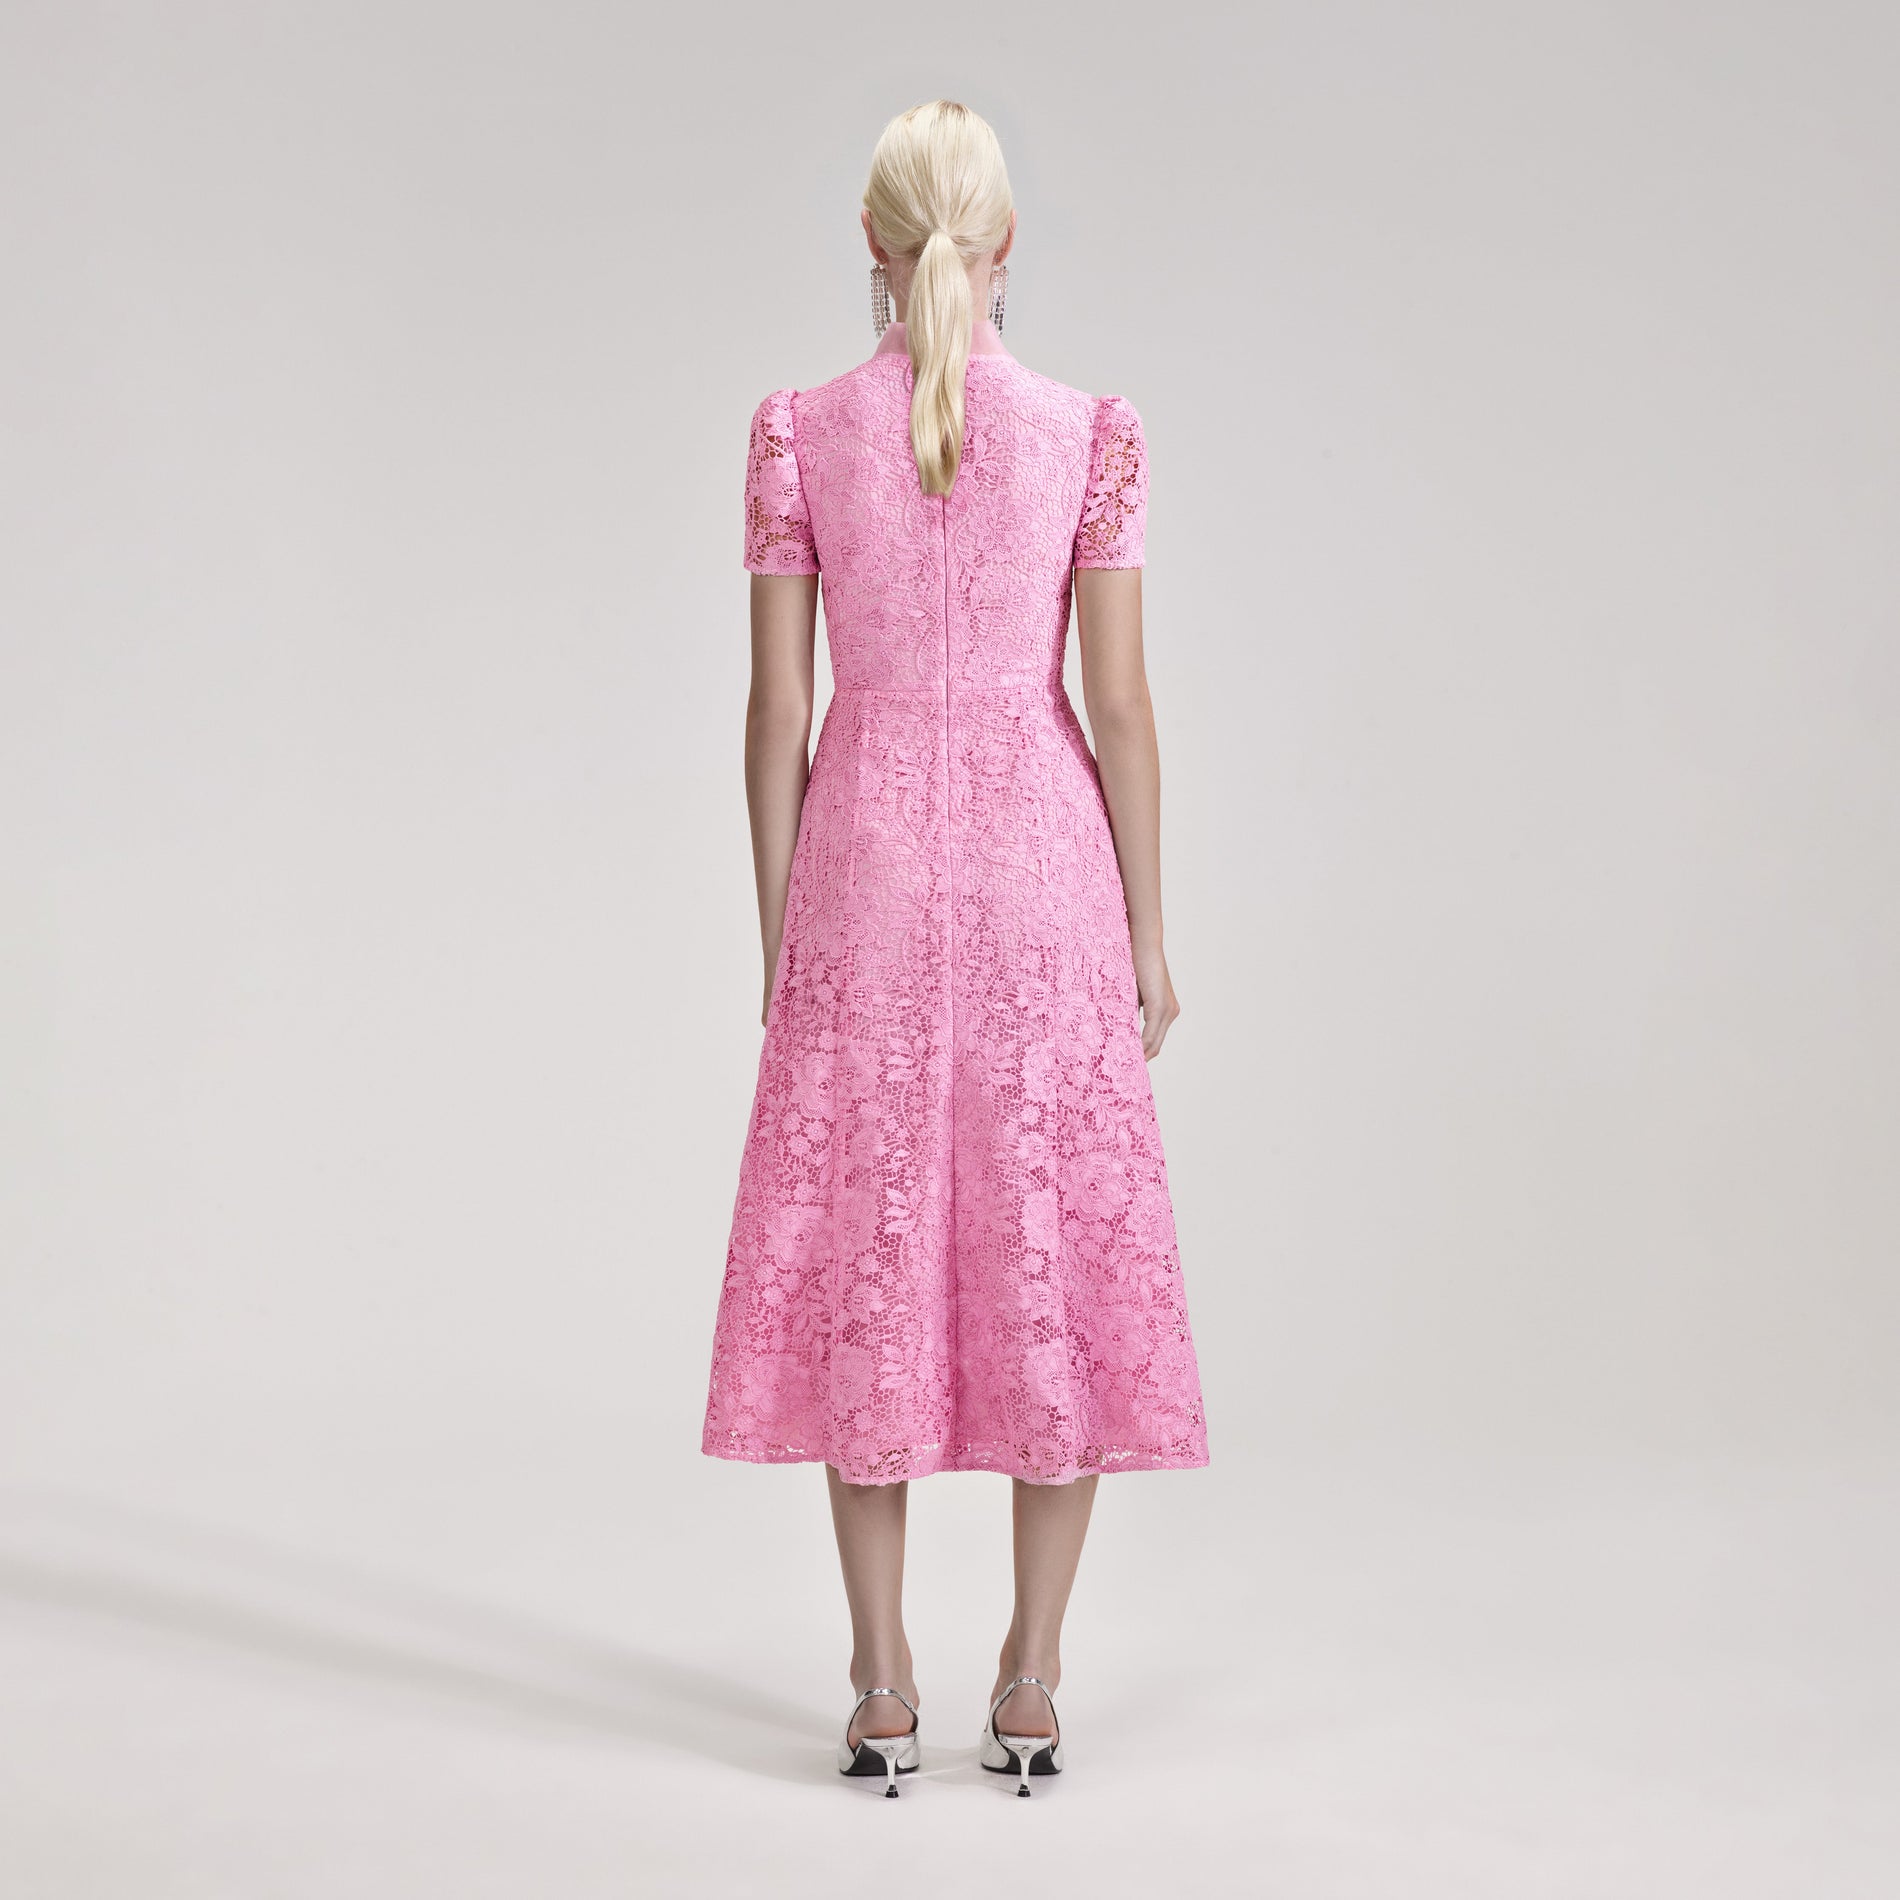 A woman wearing the Pink Cord Lace Crossover Midi Dress